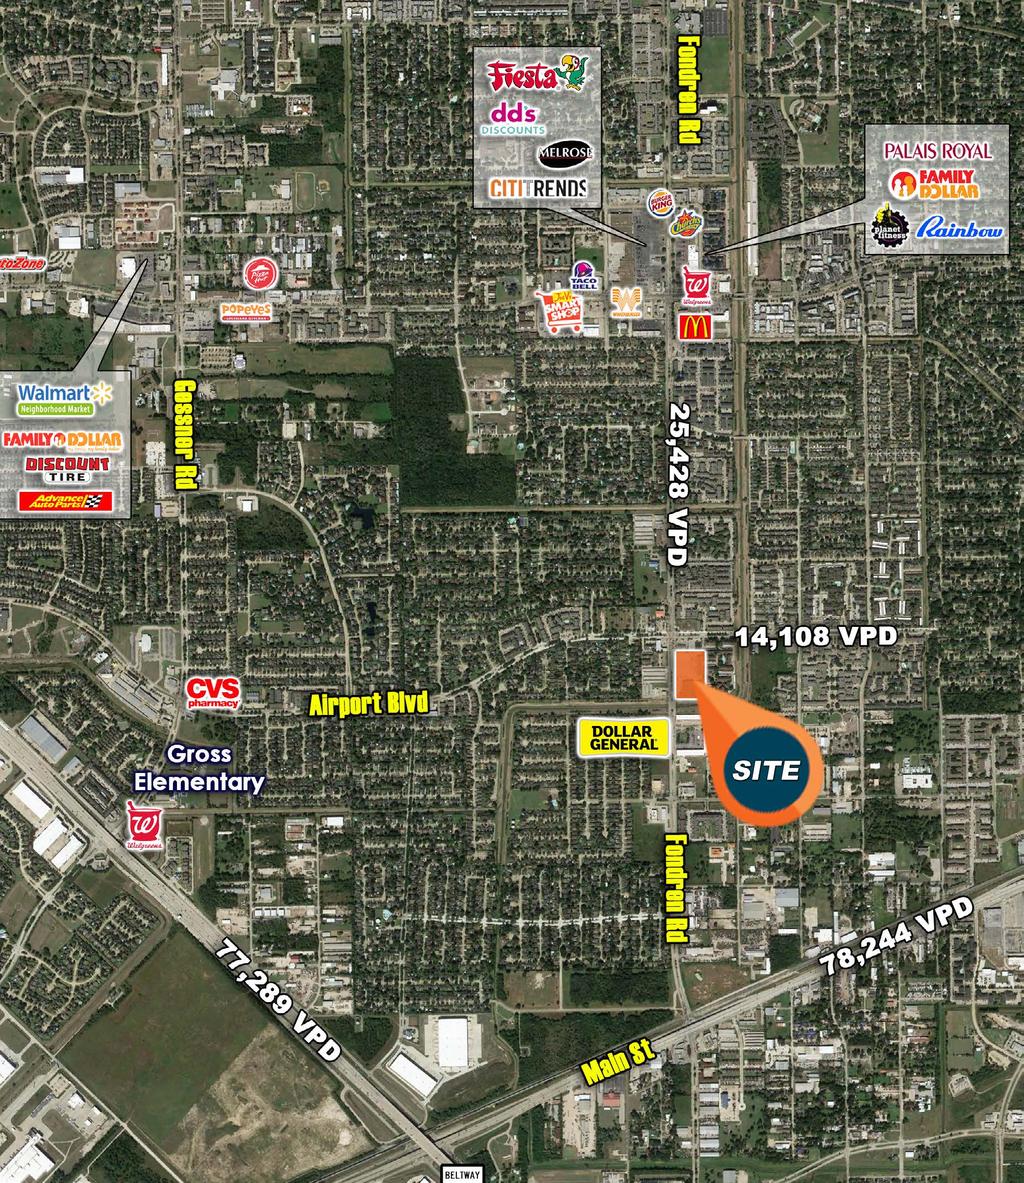 For Lease FONDREN SQUARE 12335-12355 Fondren Rd, Houston, Texas 77035 Property Information Space For Lease Rental Rate NNN Total Sq. Ft. 37,064 SF $6.00 PSF - Box Space $9.00 PSF - Inline Space $3.